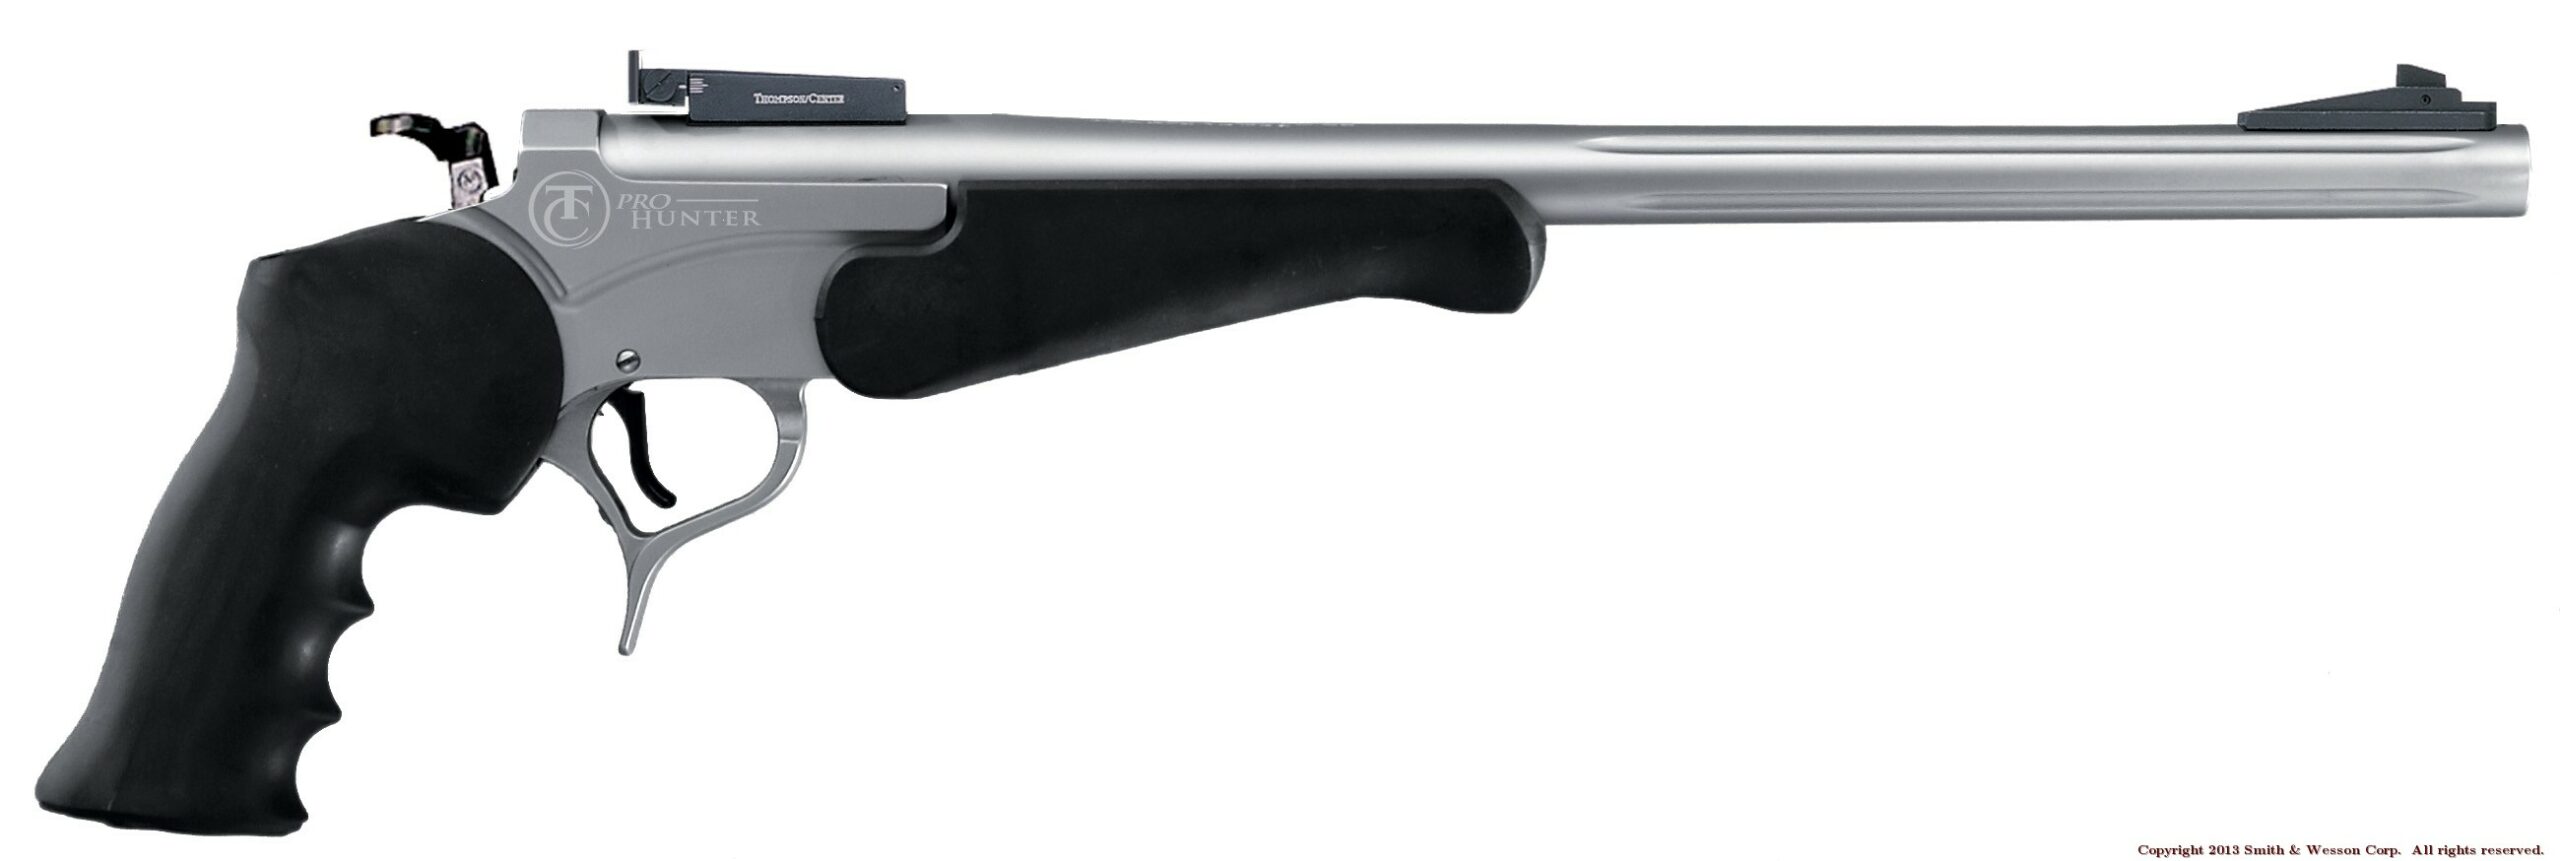 Chambered in .223 and .308, this handgun is capable of hunting a wide variety of game.